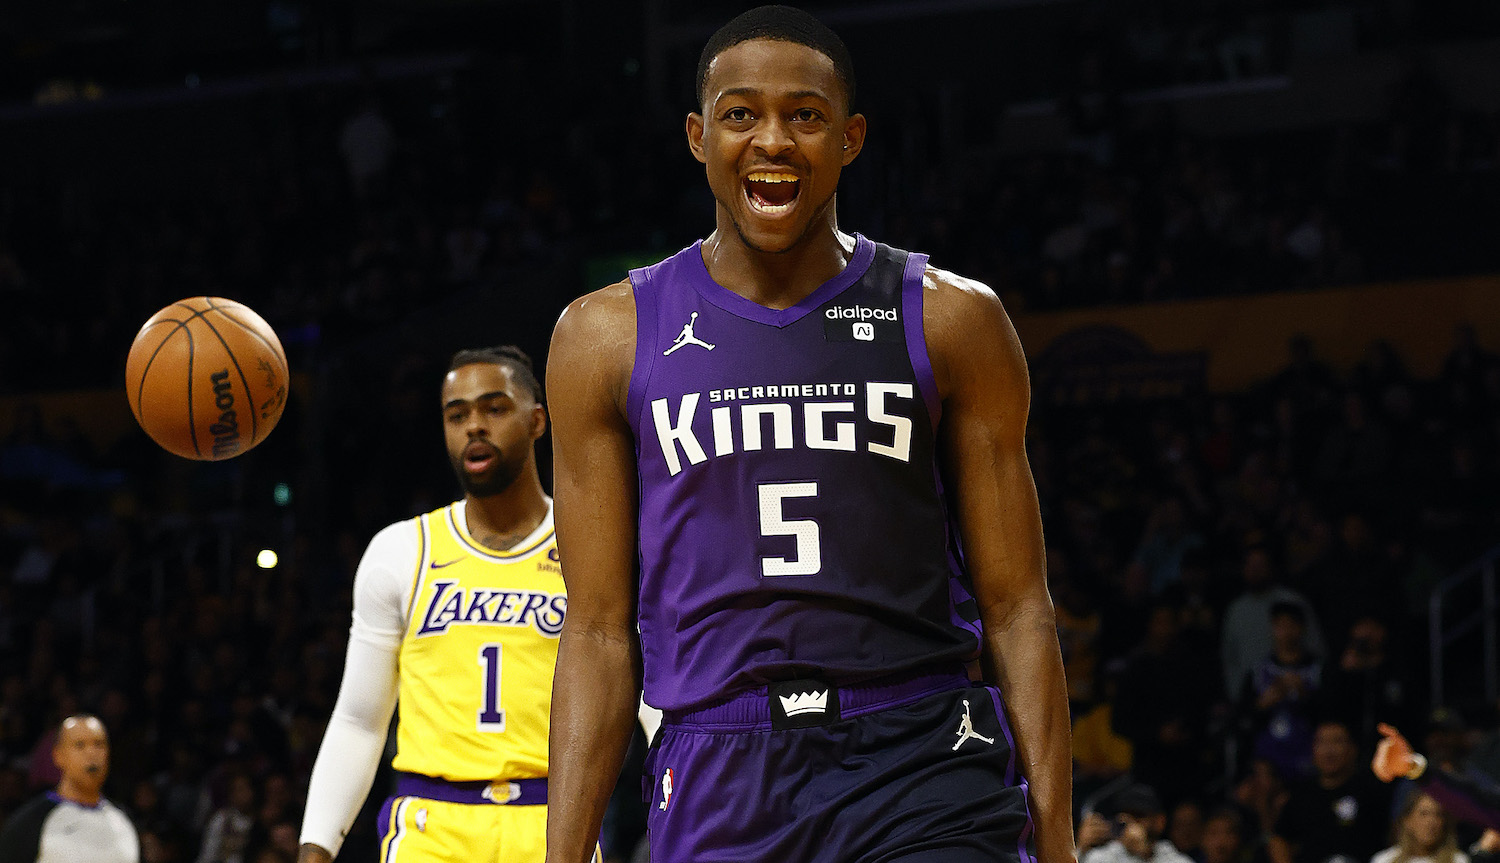 LOS ANGELES, CALIFORNIA - NOVEMBER 15: De'Aaron Fox #5 of the Sacramento Kings after fouled by D'Angelo Russell #1 of the Los Angeles Lakersin the first quarter at Crypto.com Arena on November 15, 2023 in Los Angeles, California. NOTE TO USER: User expressly acknowledges and agrees that, by downloading and/or using this photograph, user is consenting to the terms and conditions of the Getty Images License Agreement. (Photo by Ronald Martinez/Getty Images)